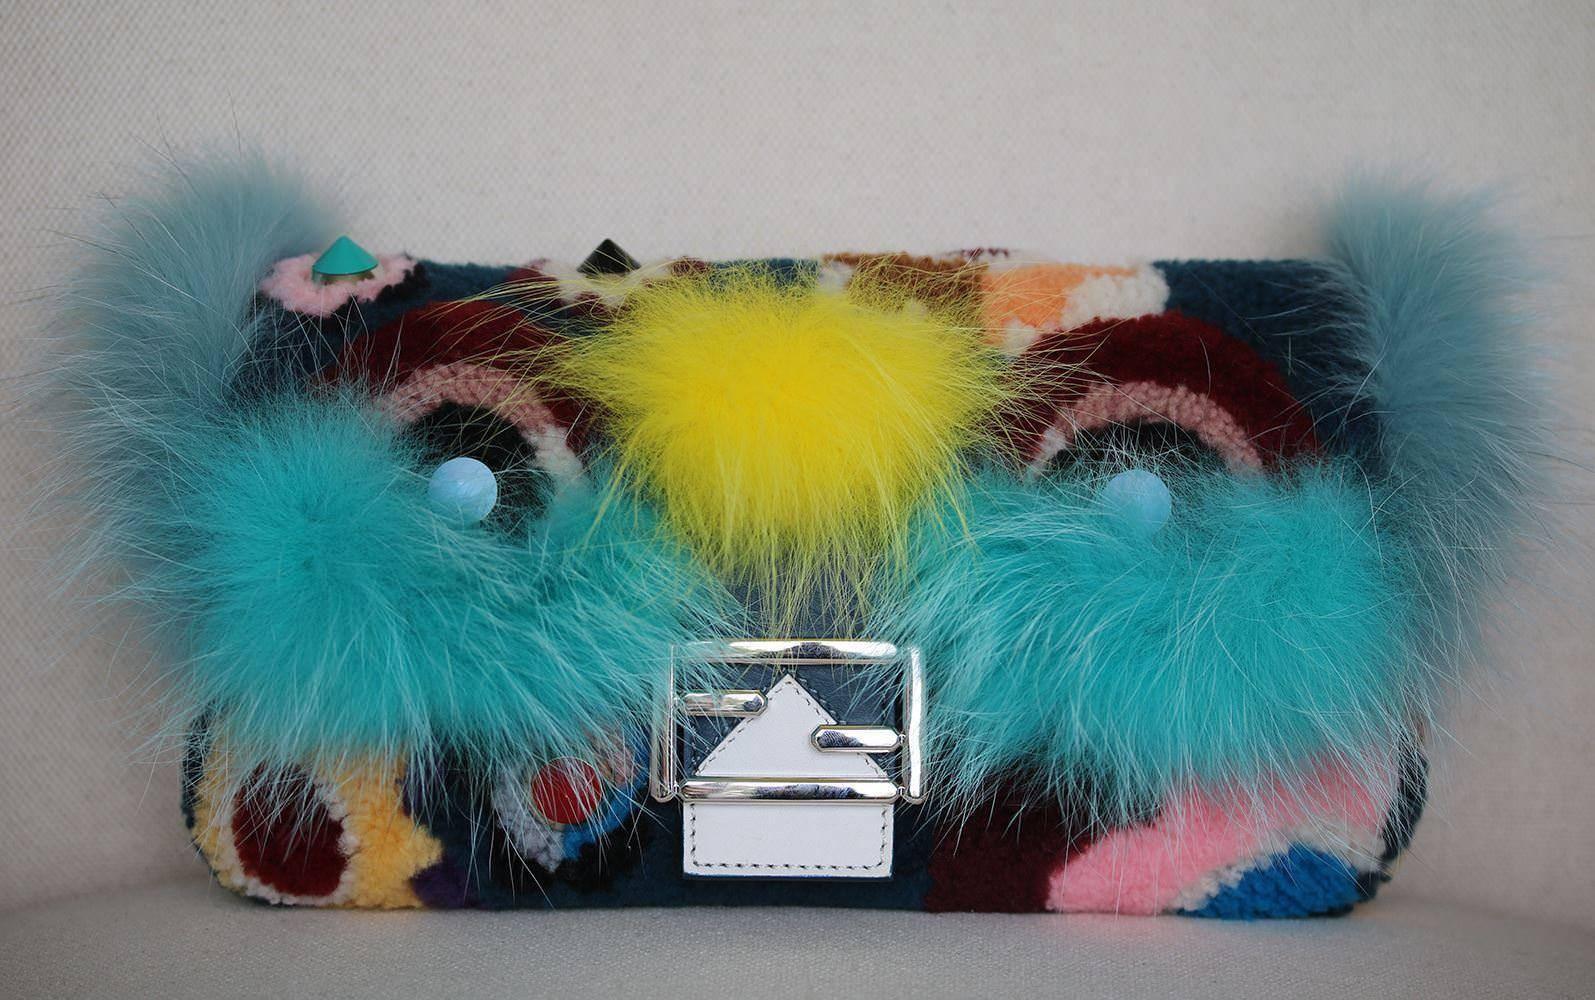 Genuine fox fur and lambskin leather form the fabulously fierce Monster face on this signature shoulder bag from Fendi. Made from colorful shearling in collection-defining flower motifs, this compact style is trimmed with cone studs and finished